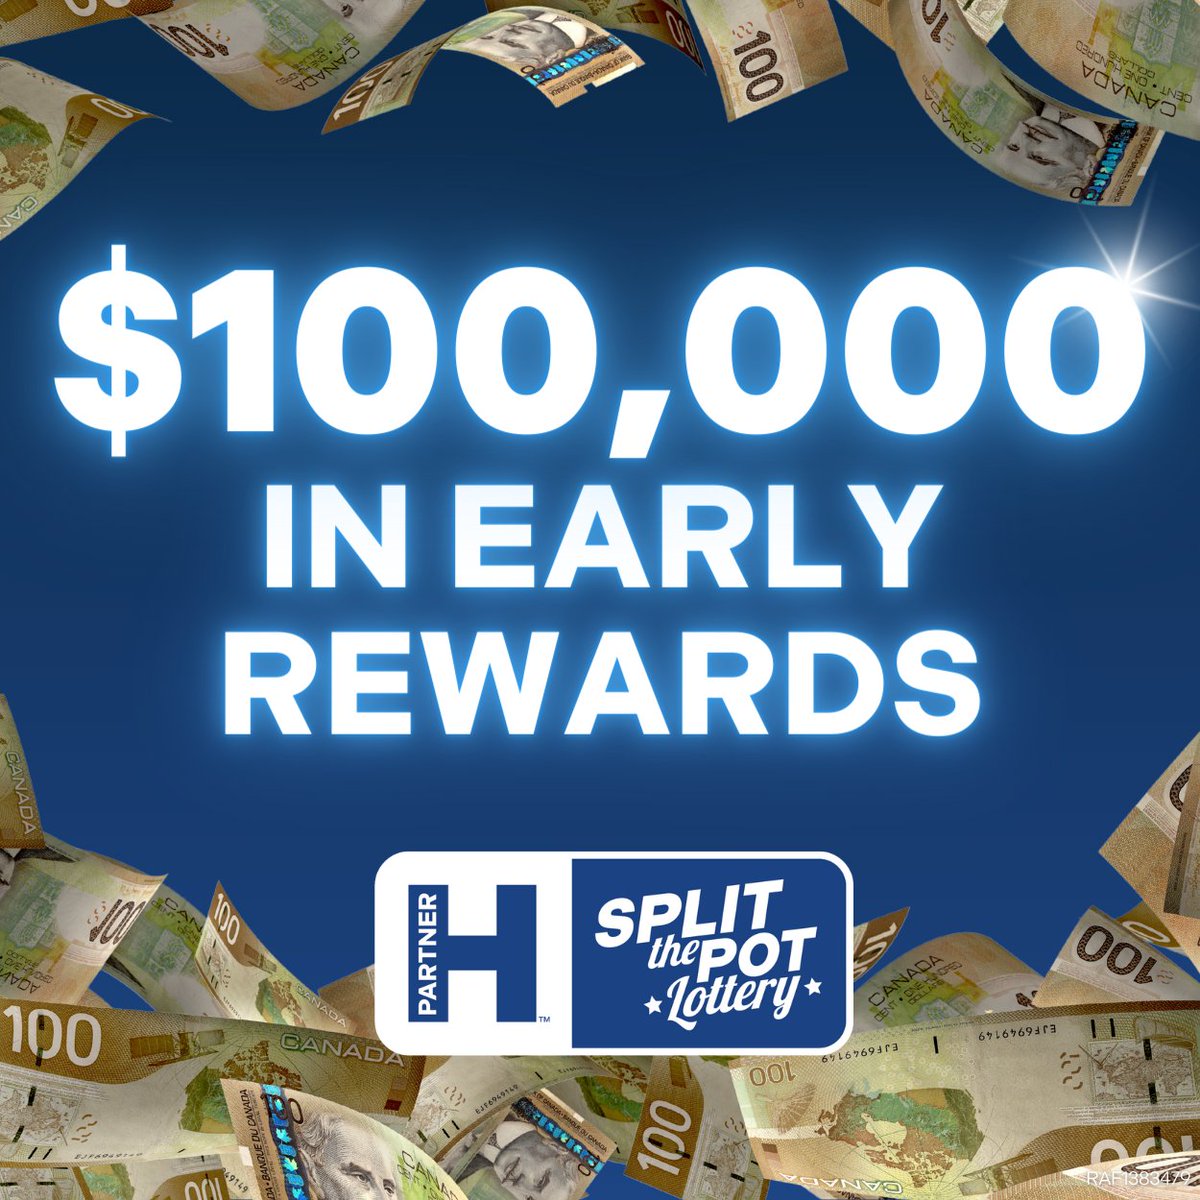 Split the Pot has $100,000 in Early Reward prizing! Direct proceeds from your ticket to St. Joe's to help us deliver the very best care. With a jackpot of $820,000 everyone’s a winner – patients, hospitals, and lucky players alike! Get tickets here: bit.ly/3yipz9r